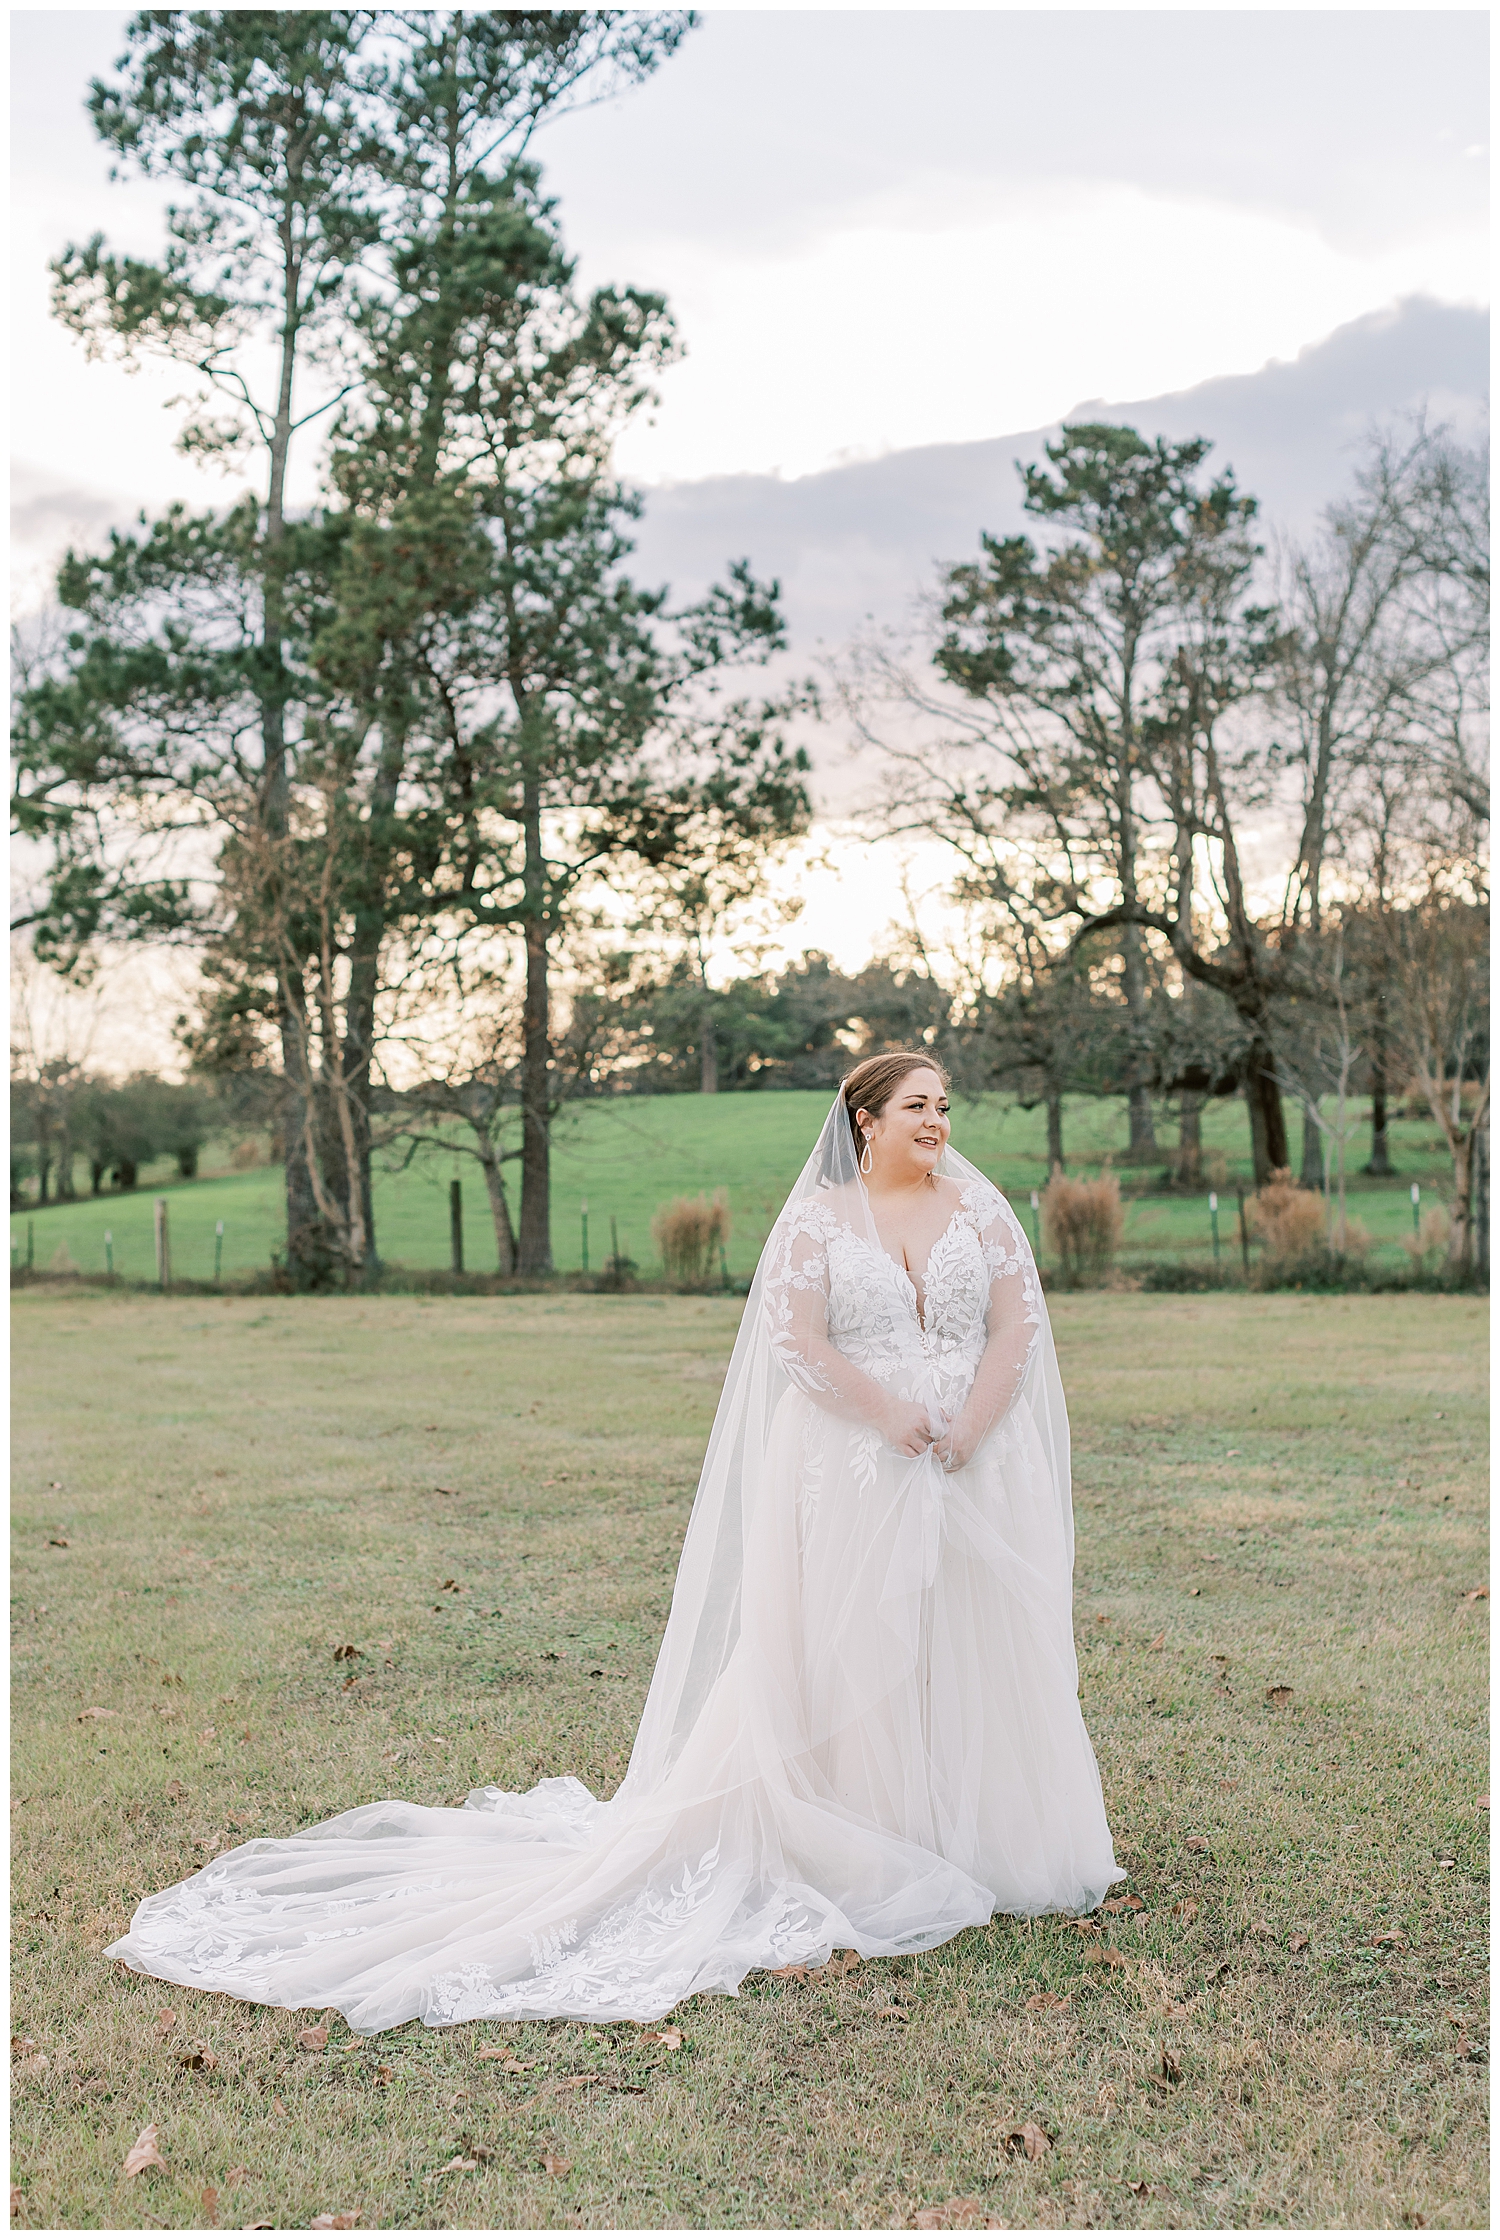 A bride smiles off into the distance.